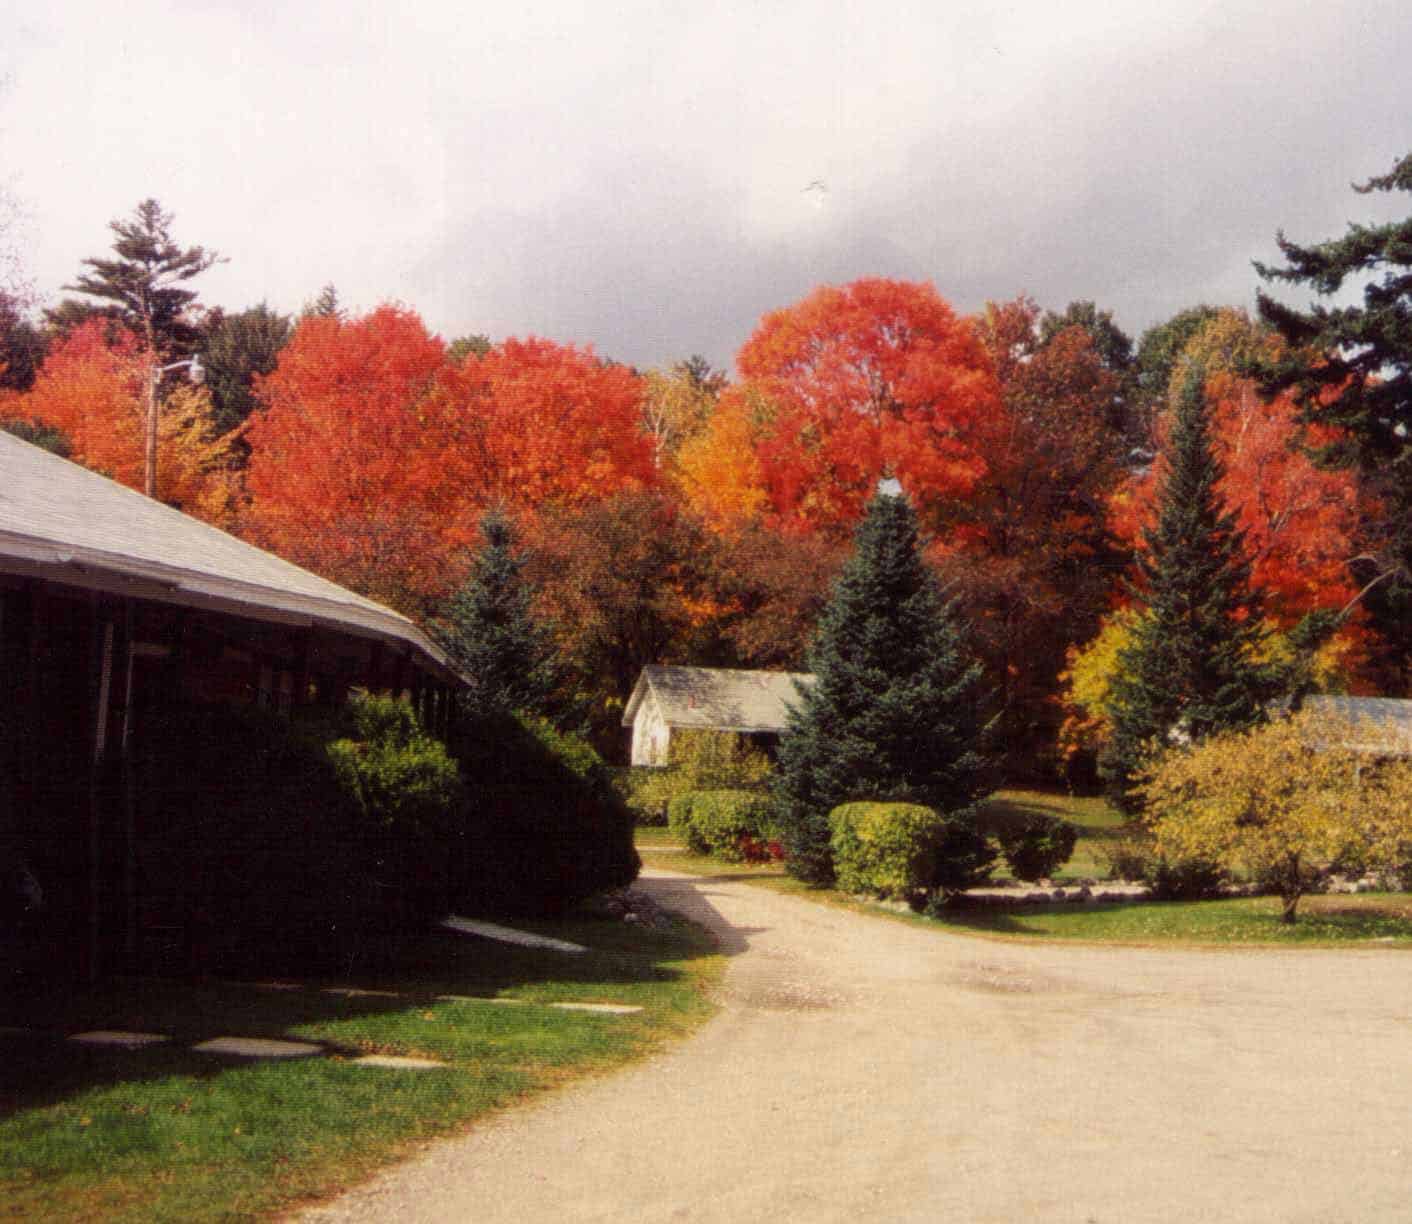 The Plymouth House in Fall